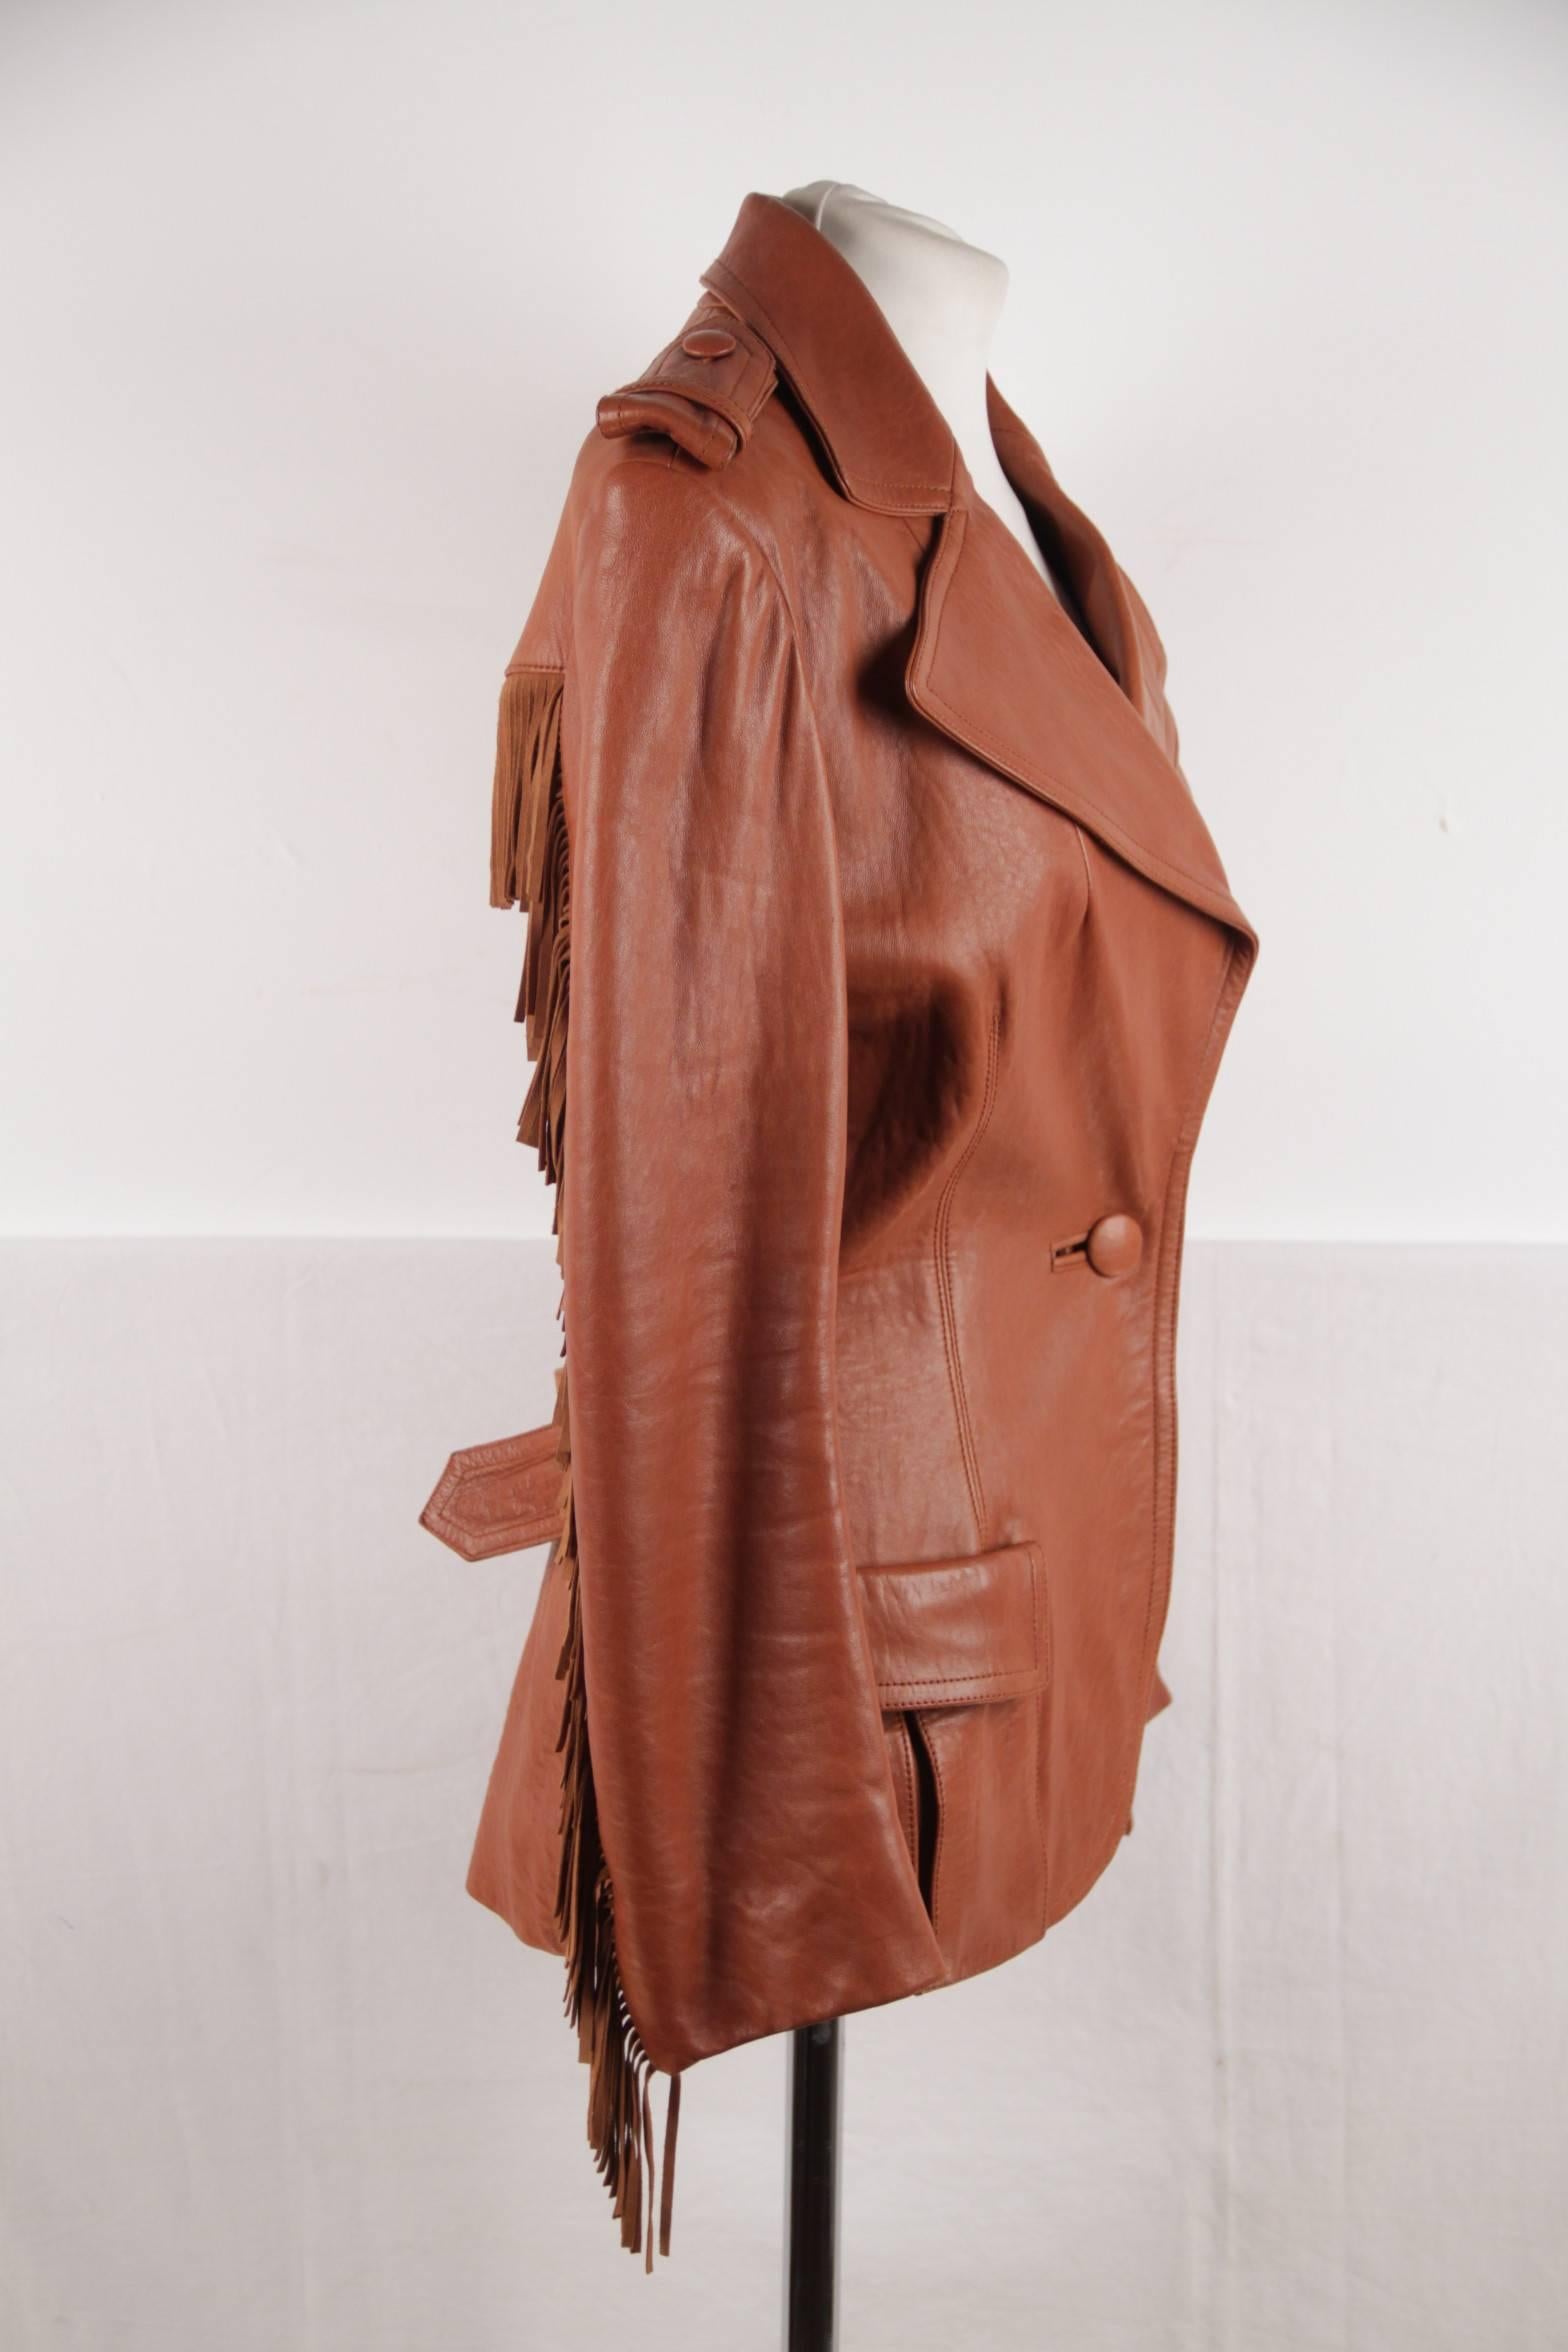 - Lanvin fringed jacket from the winter 2005 season
- 100% lambskin leather
- Cowboy/western styling
- It has a row of fringe across the back and down the sleeves
- Notched lapels
- 2 pockets
- Belt to pull in the waistline
- Silk lining
-